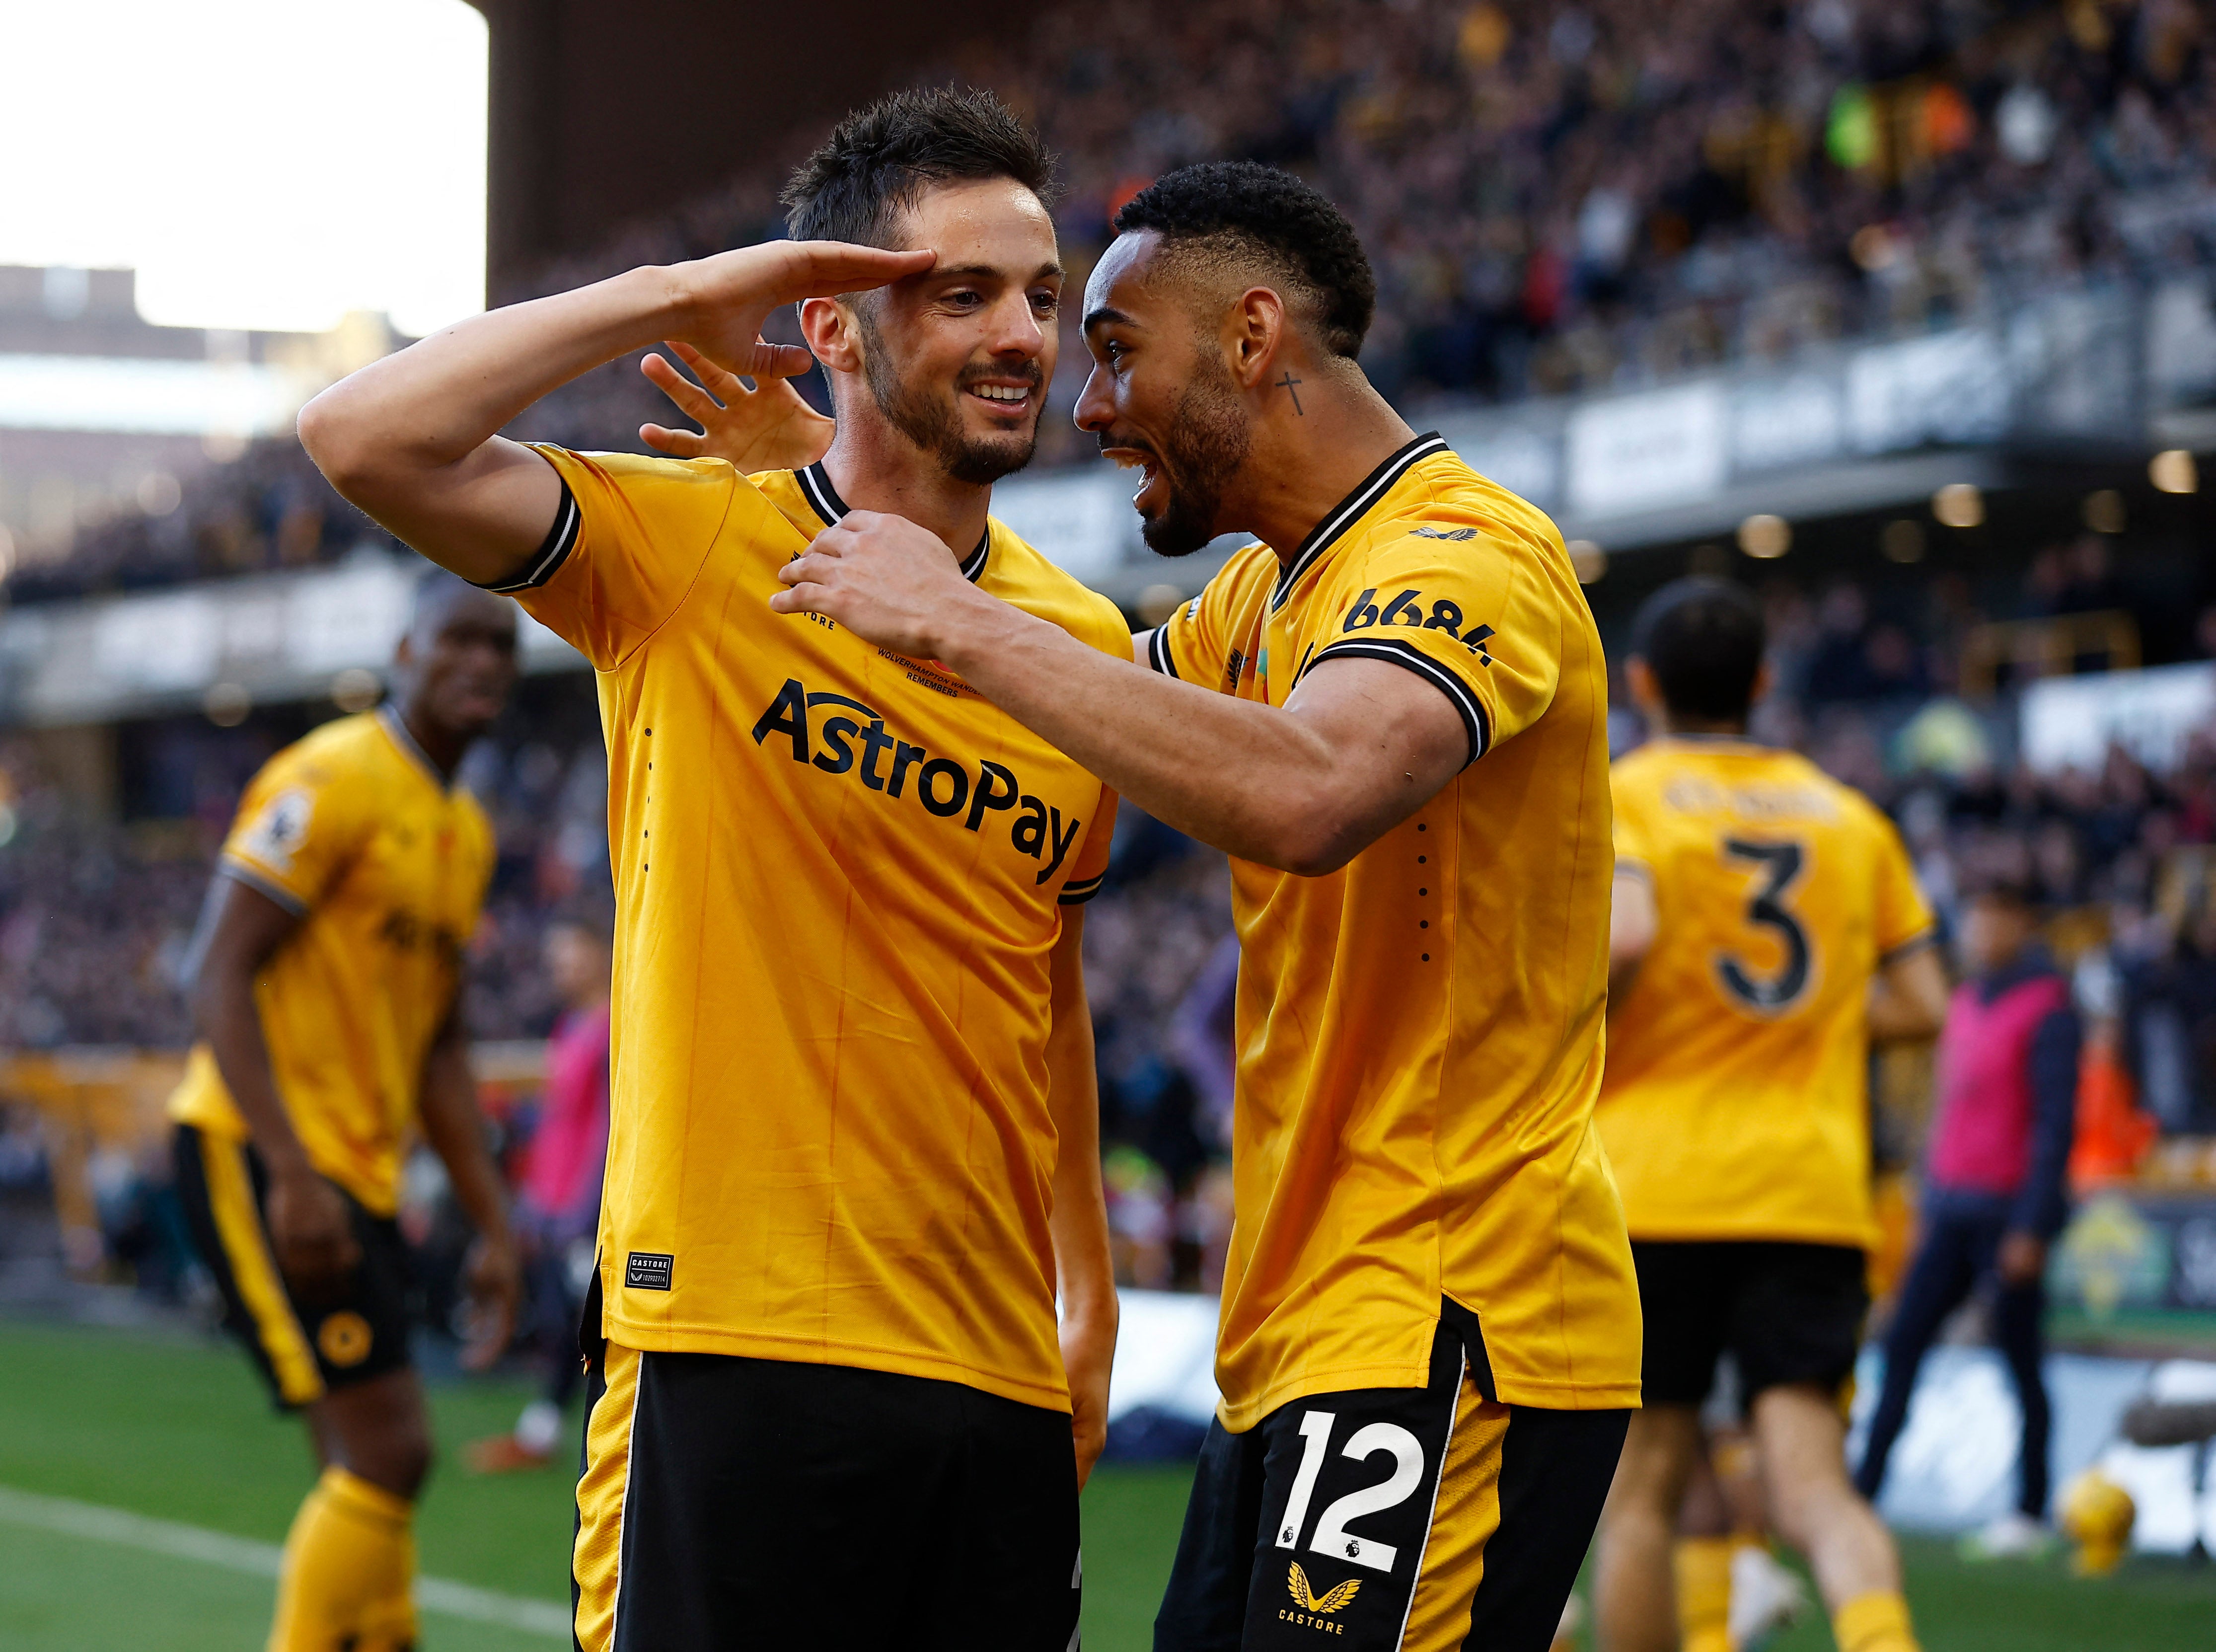 Pablo Sarabia scored a beautiful equaliser before Wolves’ late winner